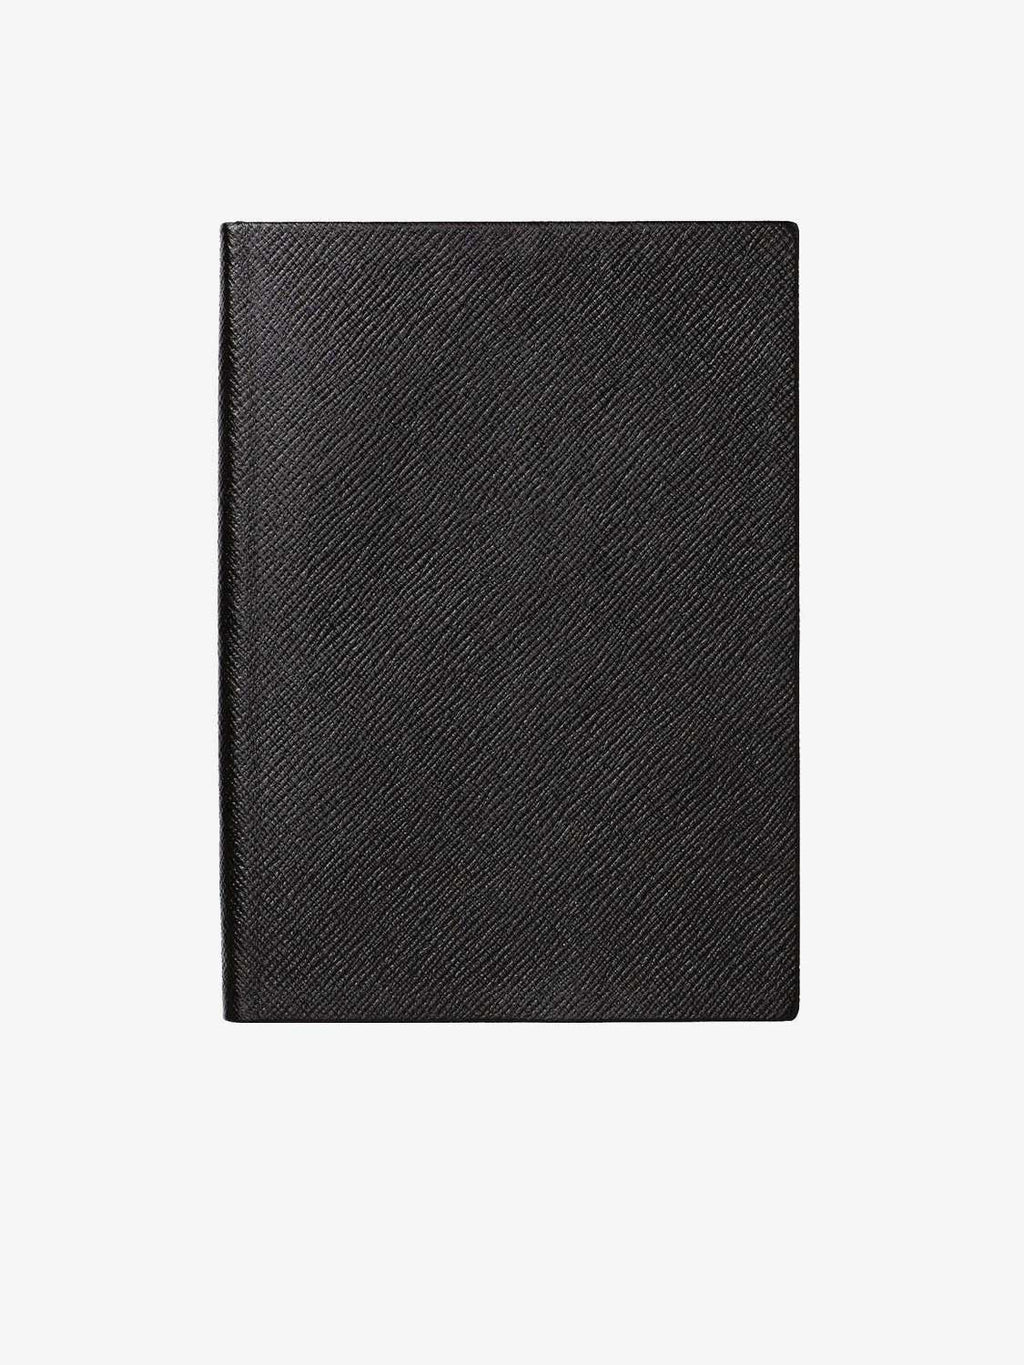 Cute Smythson Wafer Notebook “Thinking of You”